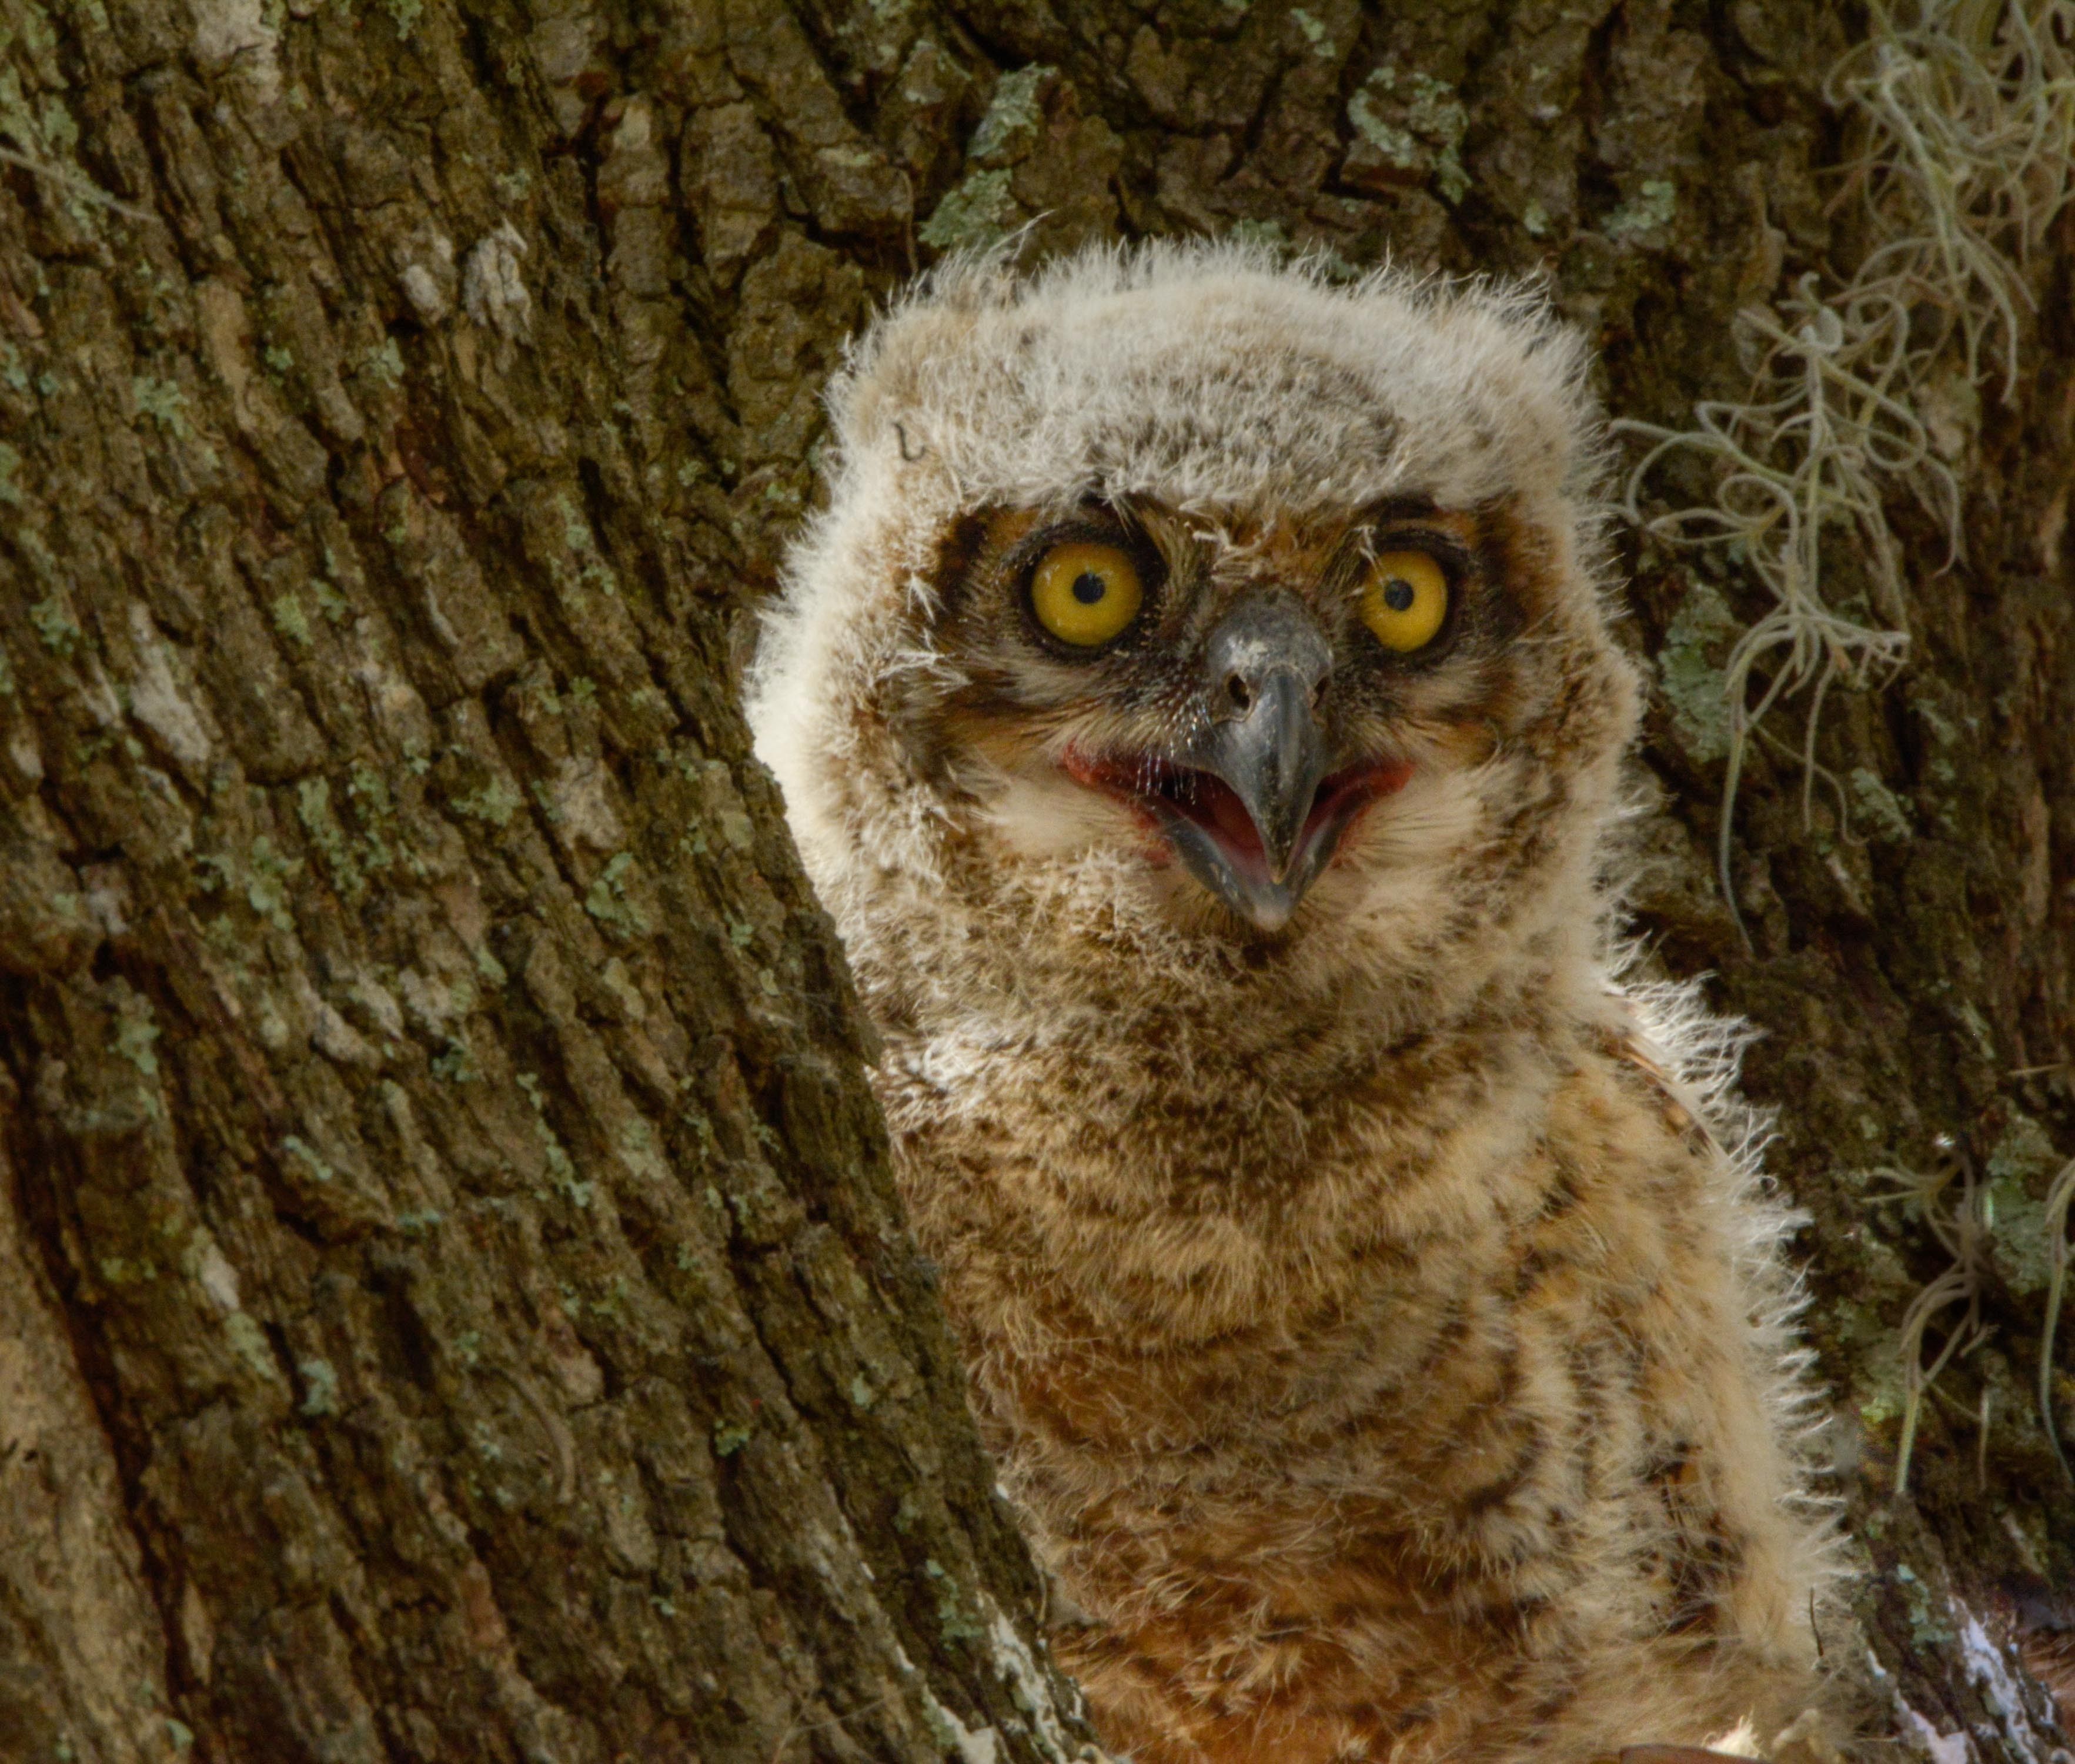 Heart shape in the face of a baby Great Horned Owl